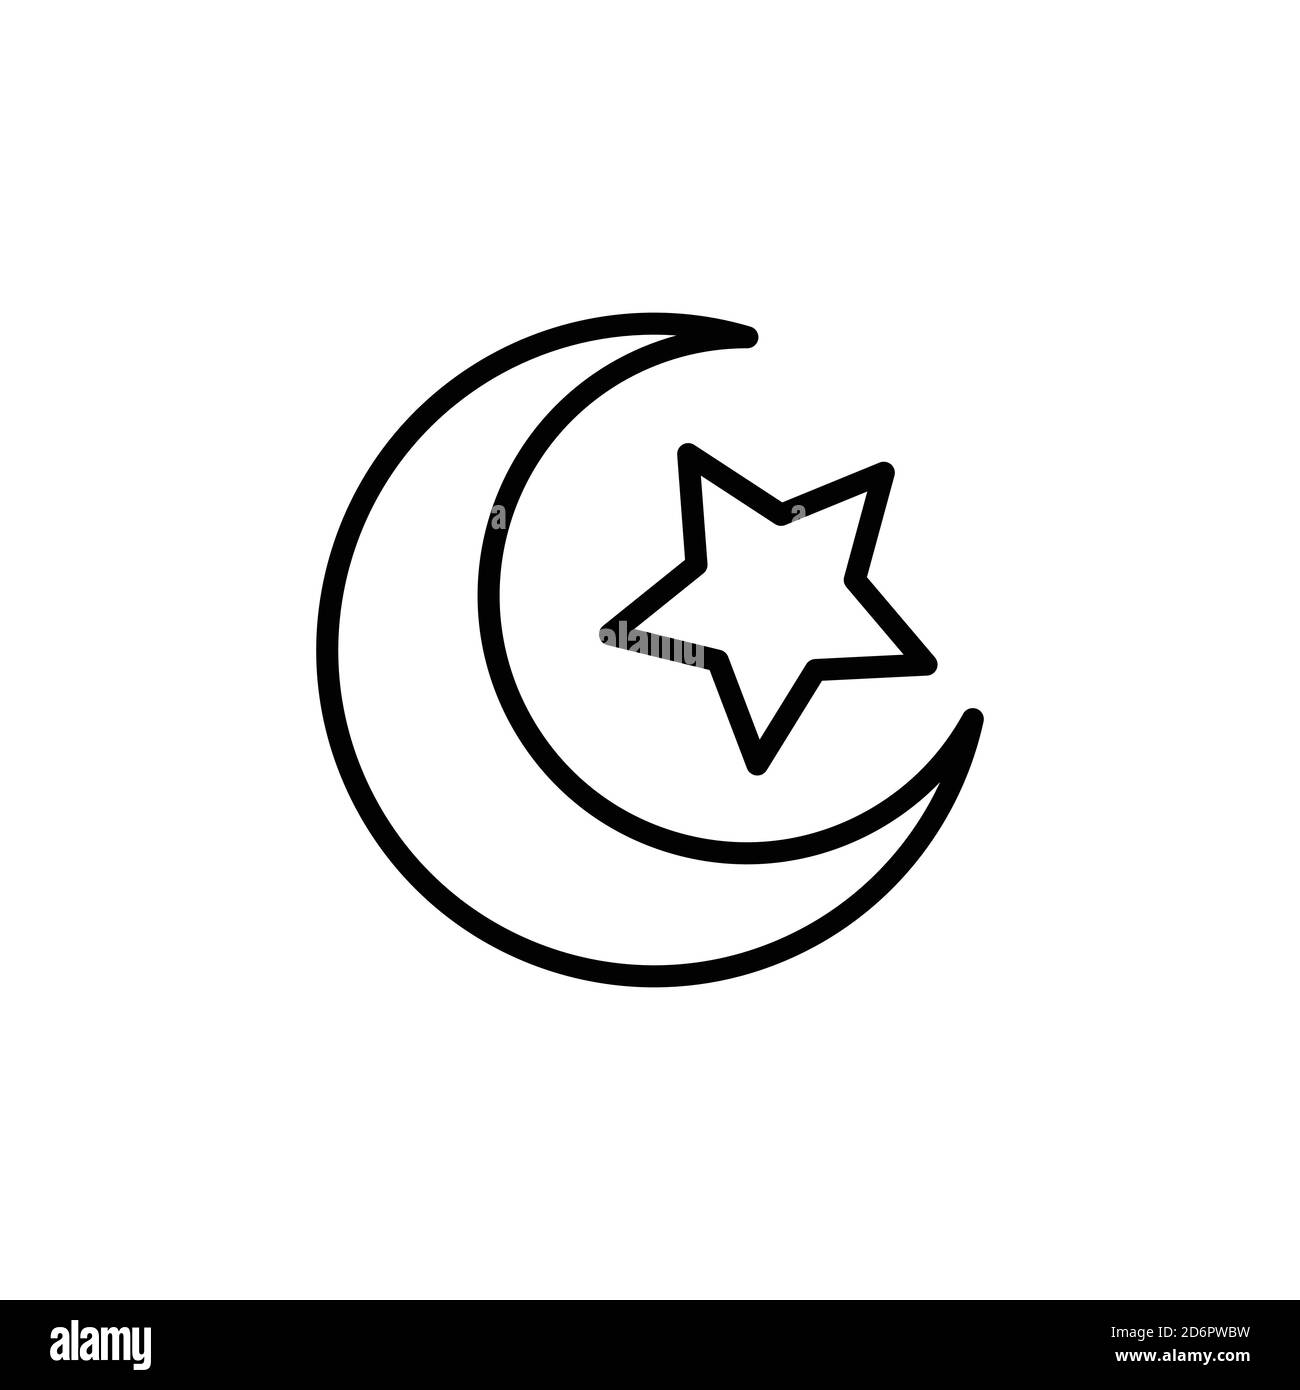 Crescent moon and star line symbol. Design template vector Stock Vector